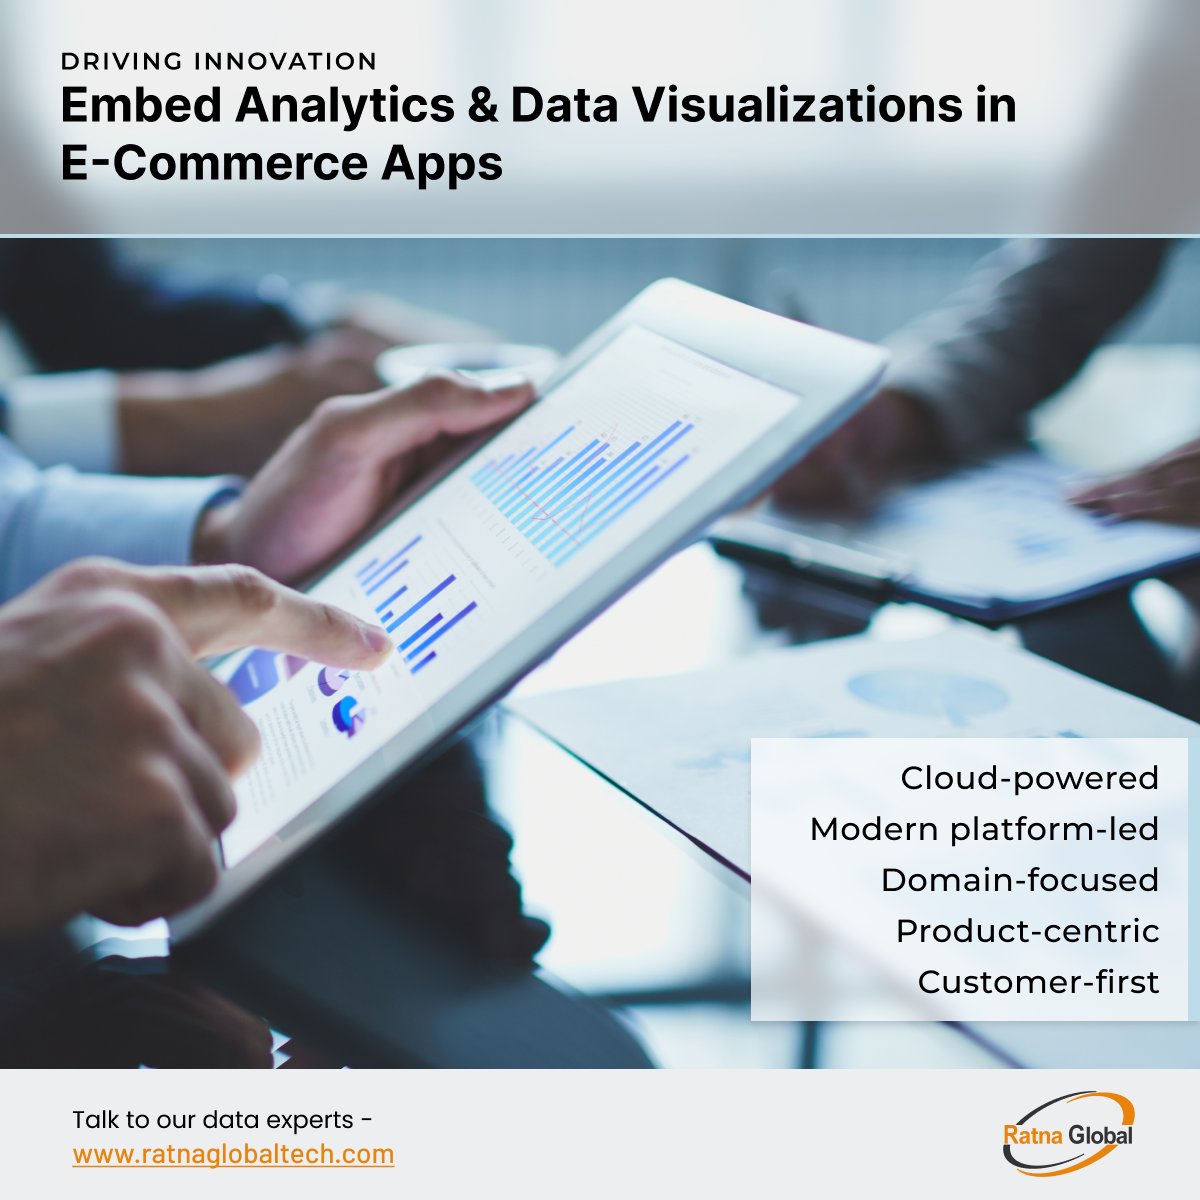 Please read our new blog to explore it further and share your understanding as well: linkedin.com/pulse/analytic… 
. 
. 
.  
#EcommerceAnalytics #DataVisualization #EcommerceInsights #BusinessIntelligence #DataAnalysis #EcommerceMetrics #DataDrivenDecisions #AnalyticsAndVisualization